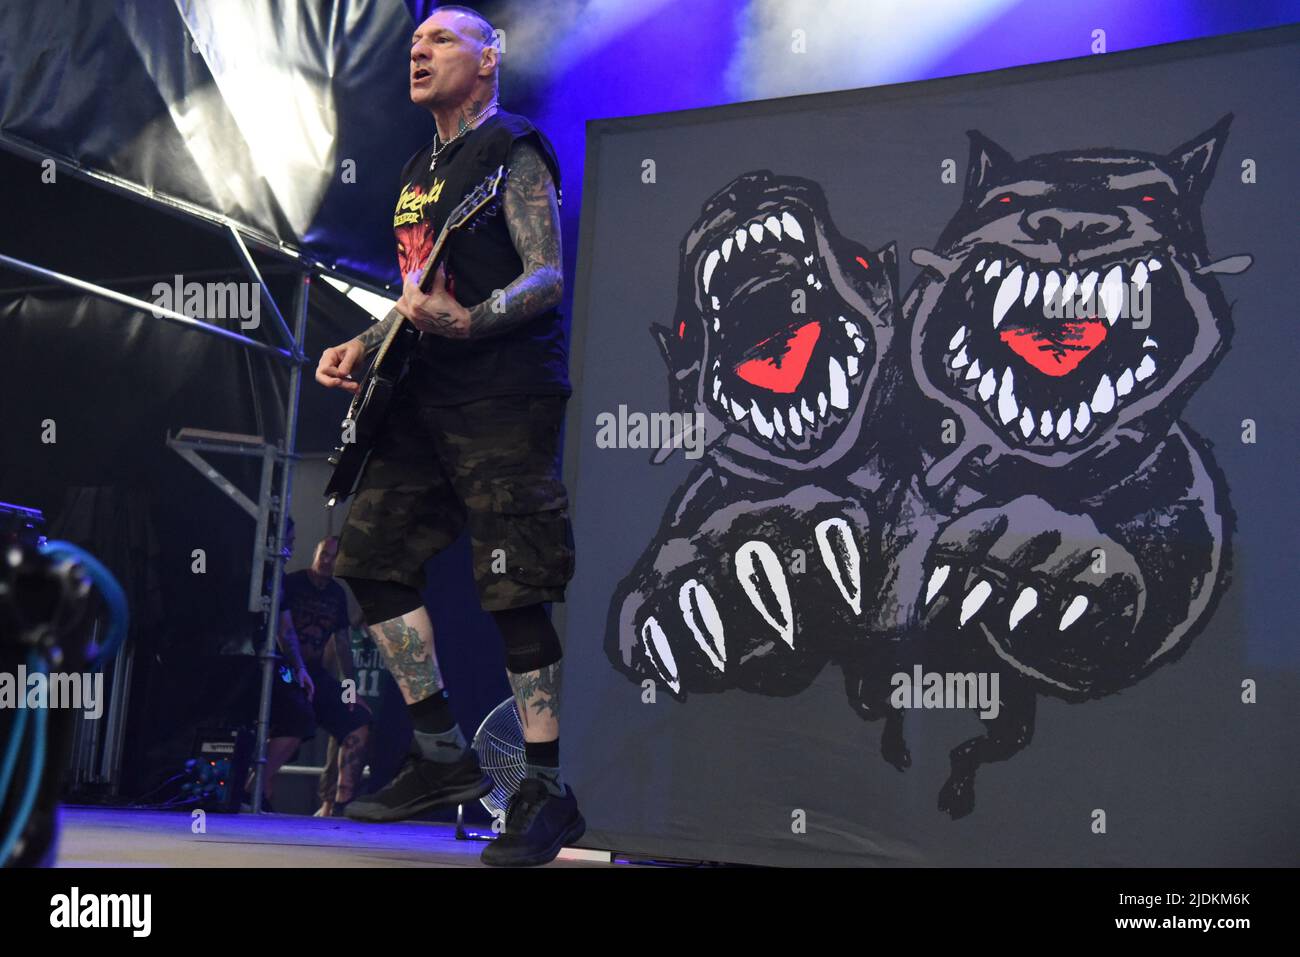 Padova, Italy. 21st June, 2022. Agnostic Front - Vinnie Stigma during The Rumjacks and Agnostic Front Opening Bad Religion, Music Concert in Padova, Italy, June 21 2022 Credit: Independent Photo Agency/Alamy Live News Stock Photo